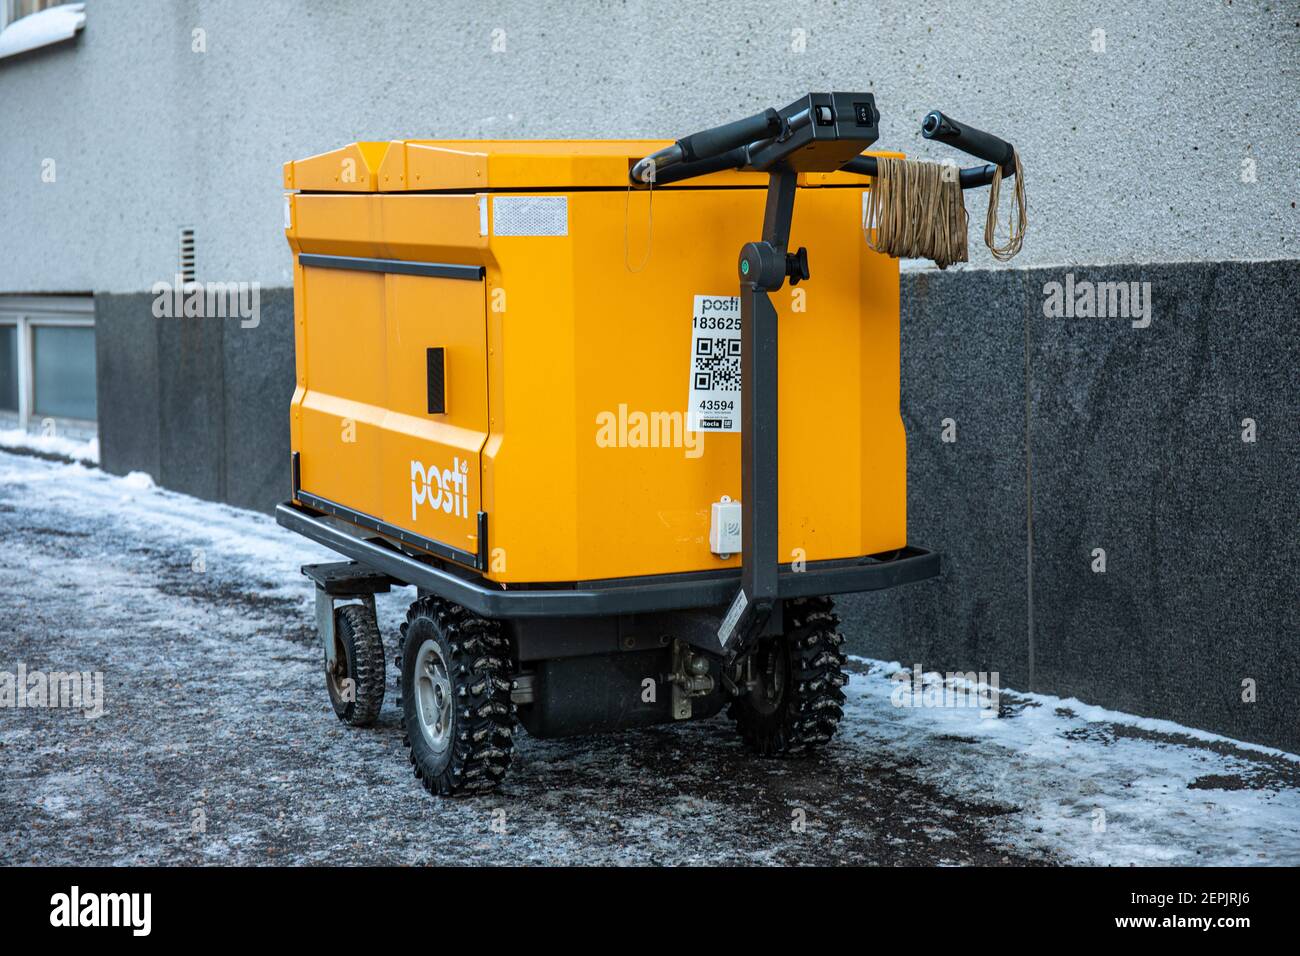 Electric mail delivery cart or trolley with Posti logo and brand color Stock Photo